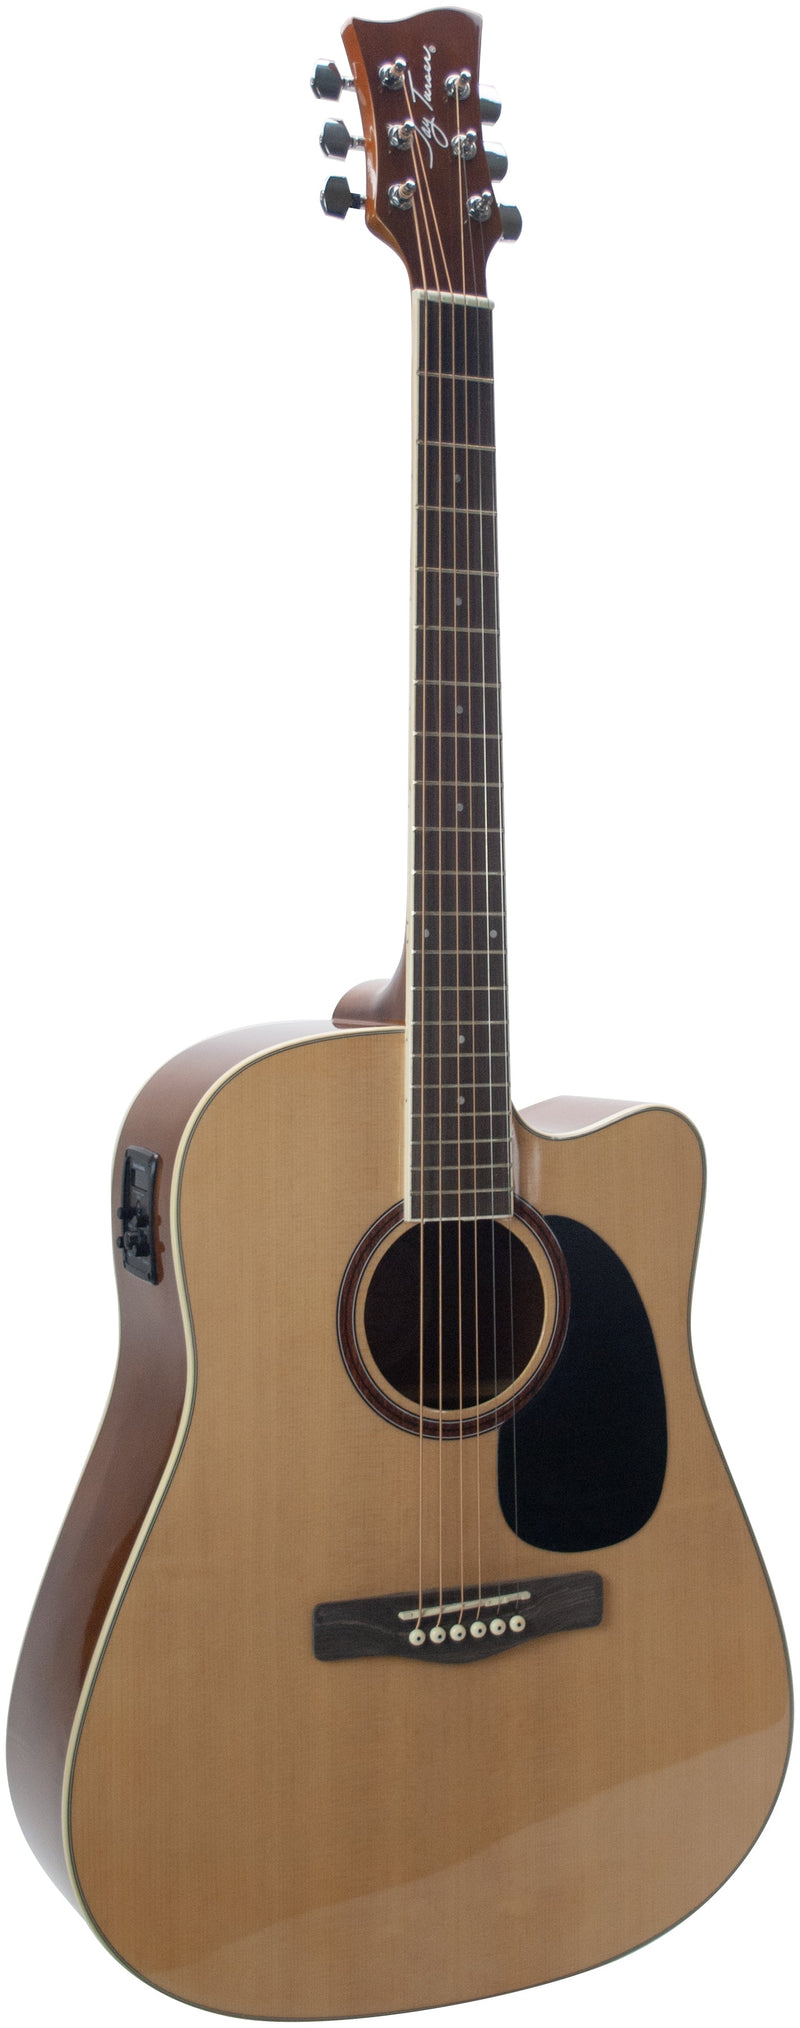 Jay Turser Dreadnought Cutaway Acoustic Guitar with EQ, Natural JTA524D-CE-N Jay Turser Guitar for sale canada